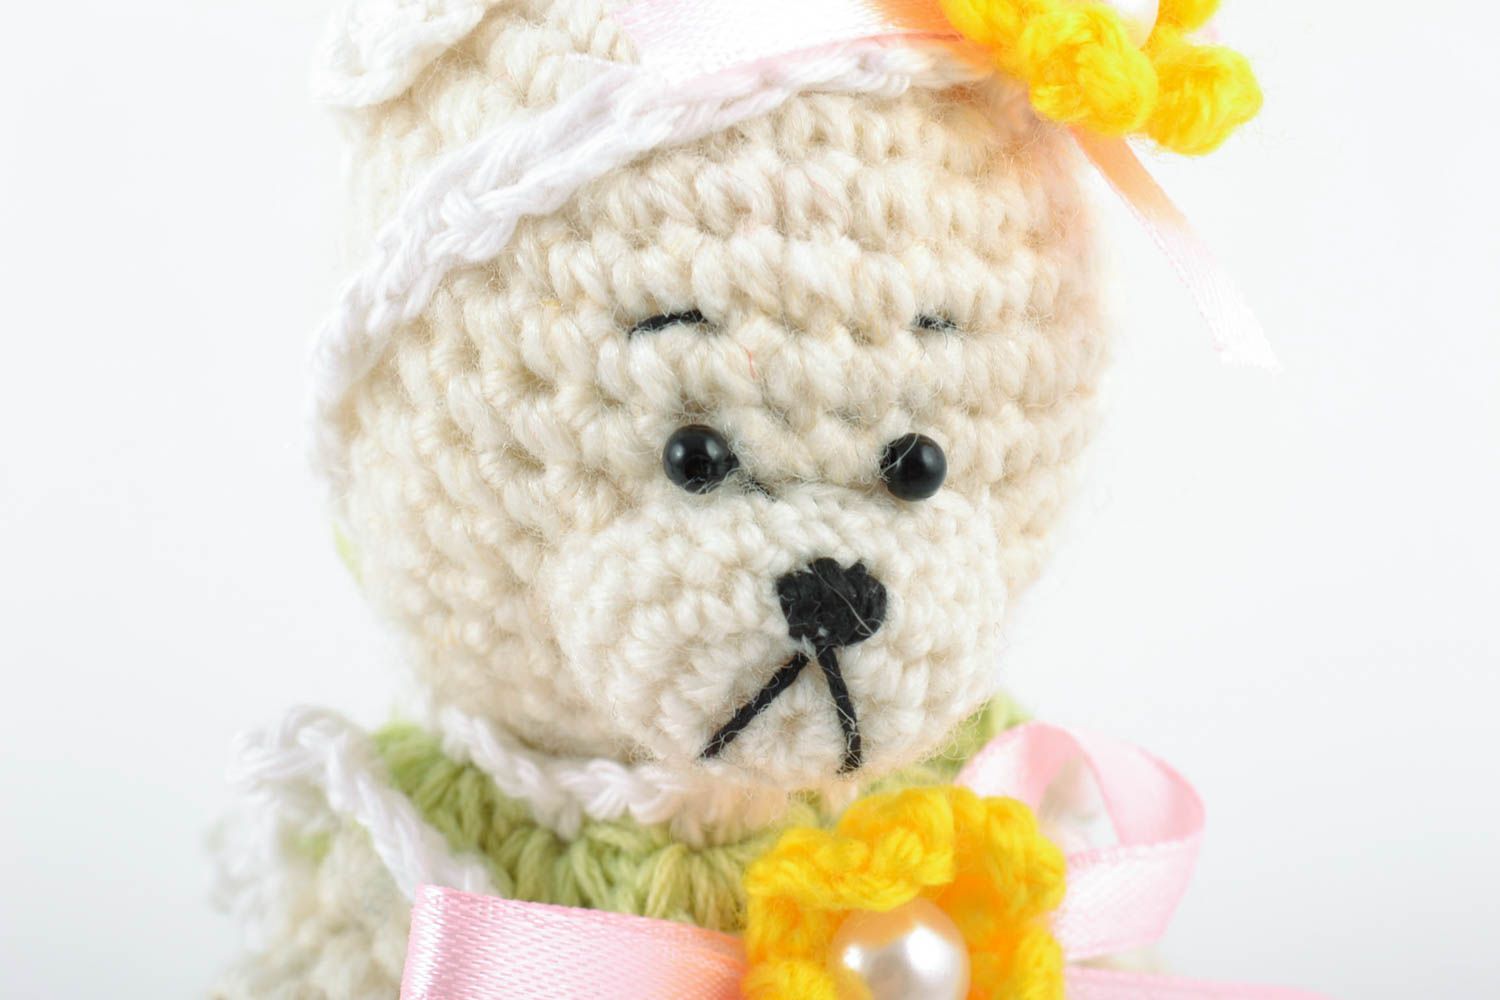 Handmade crocheted soft toy made of wool for children and home interior photo 3